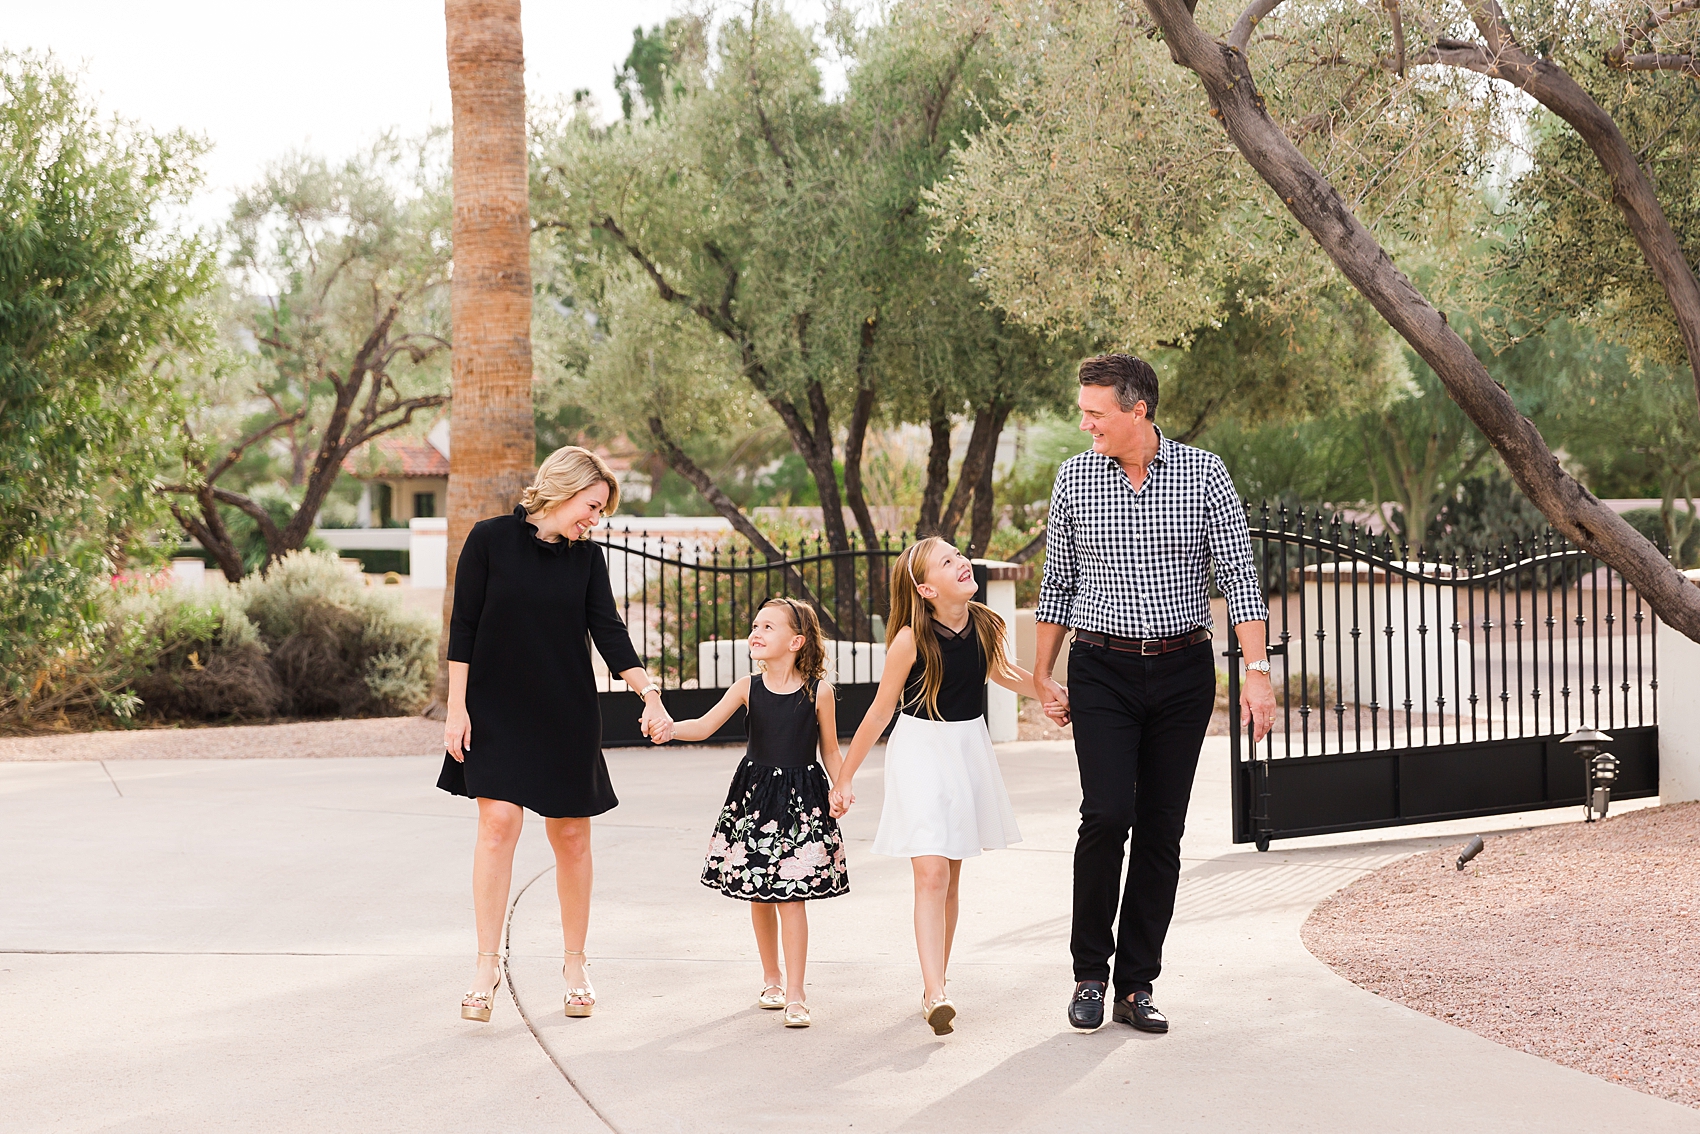 Leah Hope Photography | Scottsdale Phoenix Arizona | Backyard Frontyard Paradise Valley Home | Family Photos | Family Pictures | What to Wear | Black and White Outfits | Family Poses